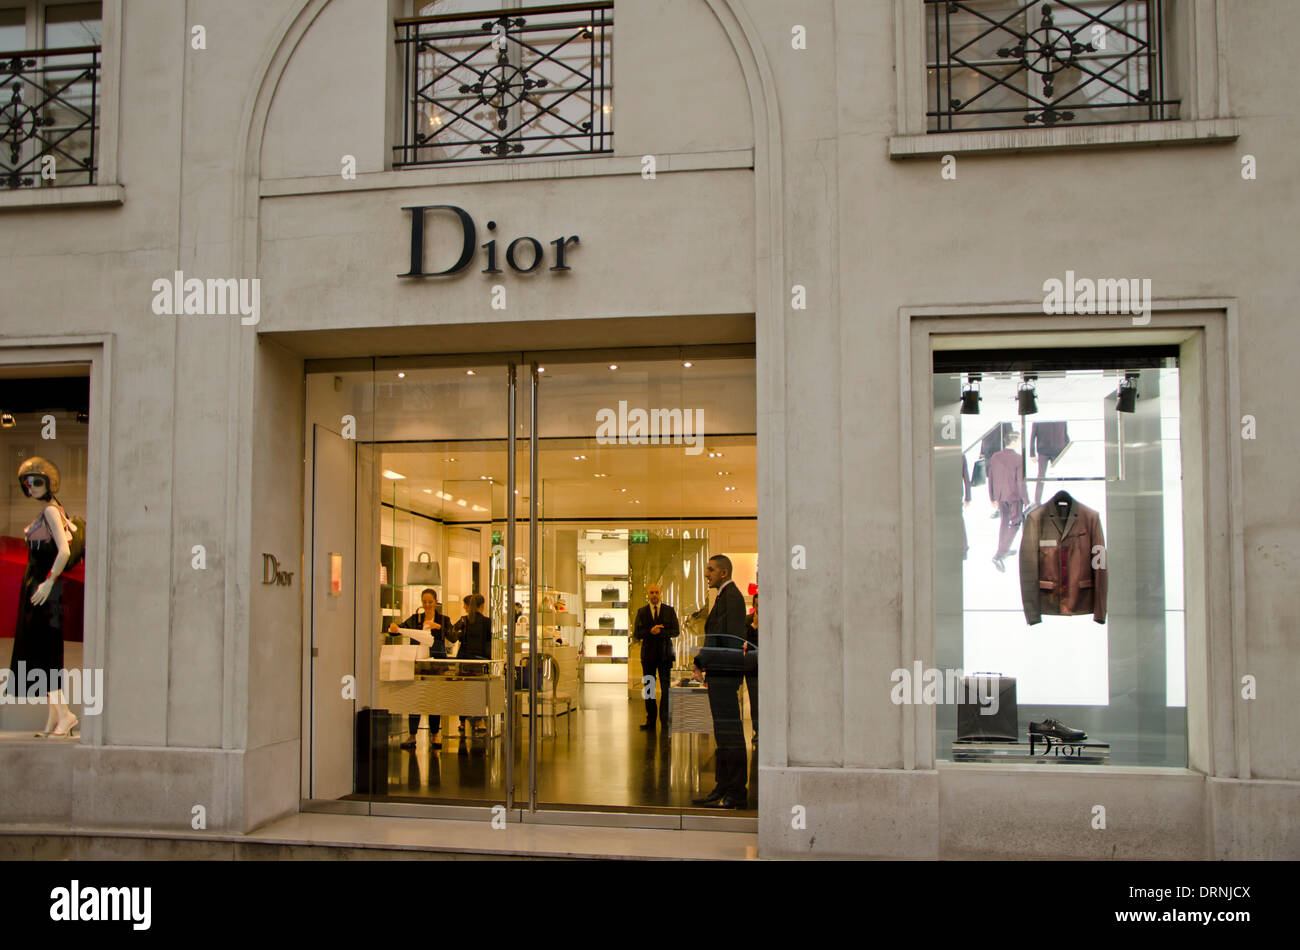 Facade of a Christian Dior fashion store, shop, in Paris, France Stock Photo: 66243658 - Alamy